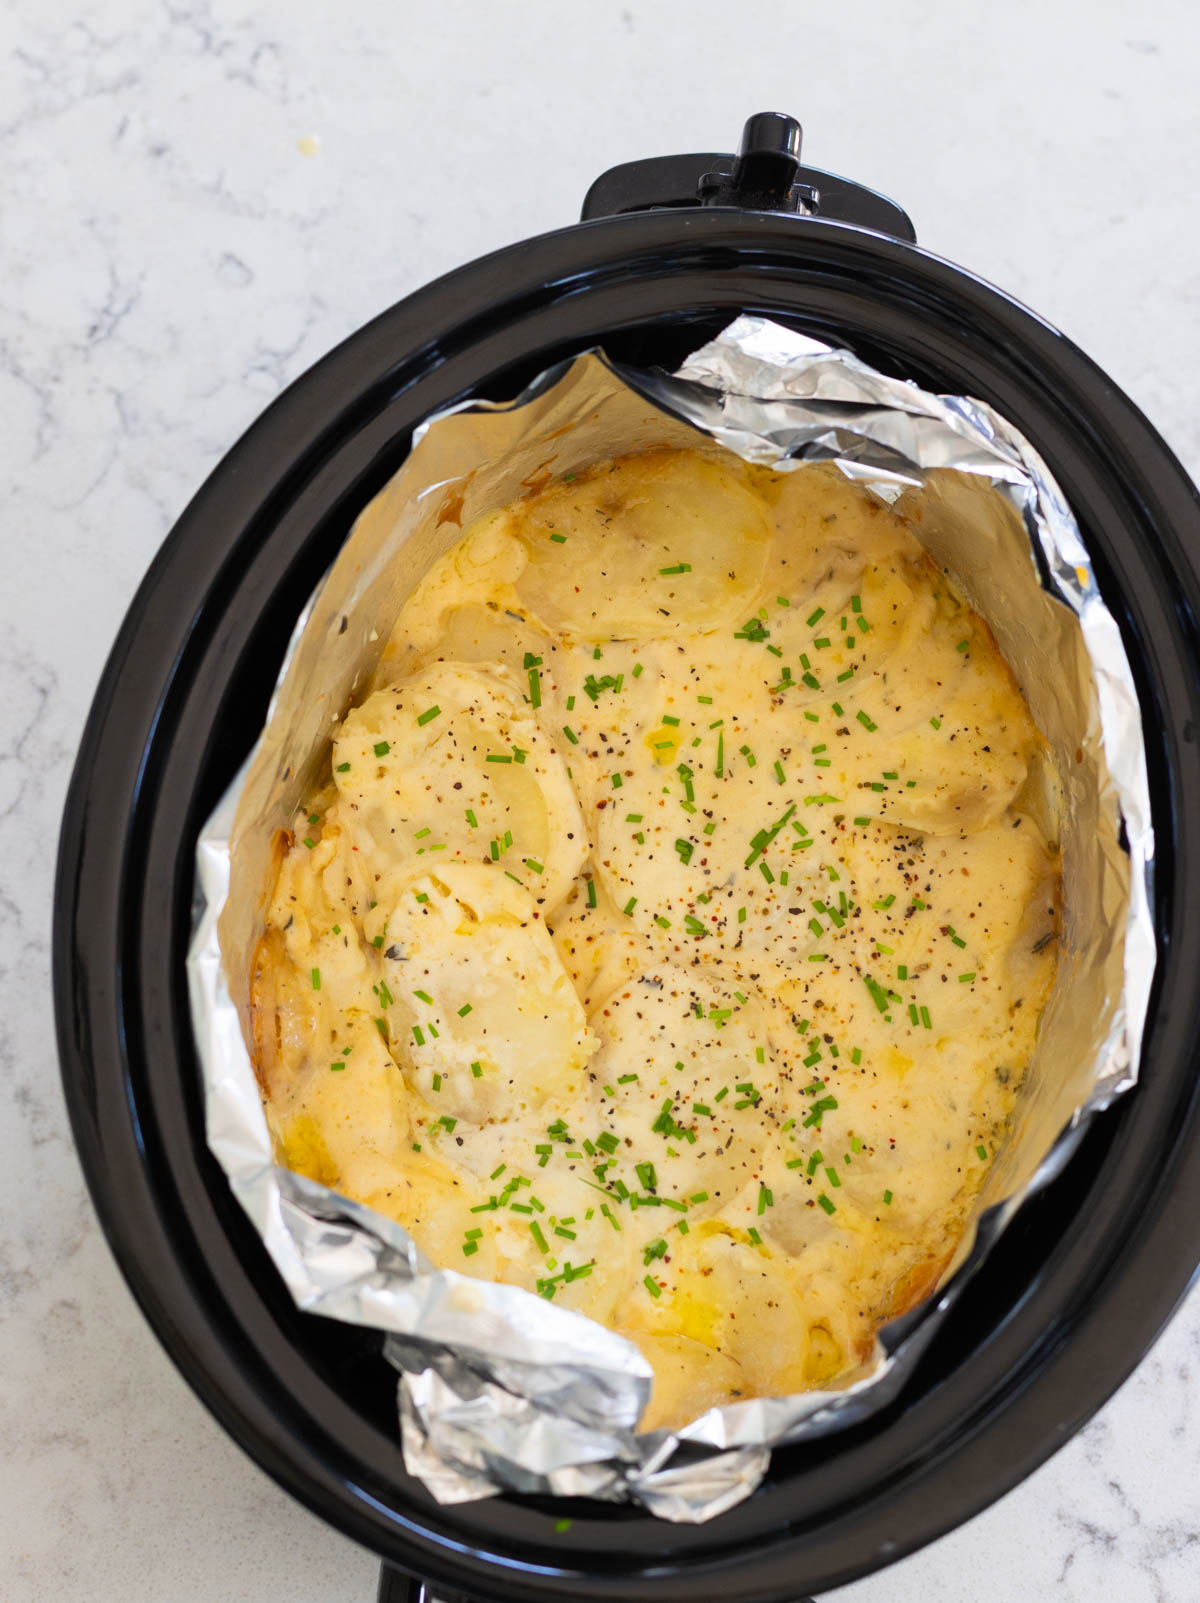 The finished scalloped potatoes have a golden yellow color with crispy edges and fresh chives sprinkled over the top.